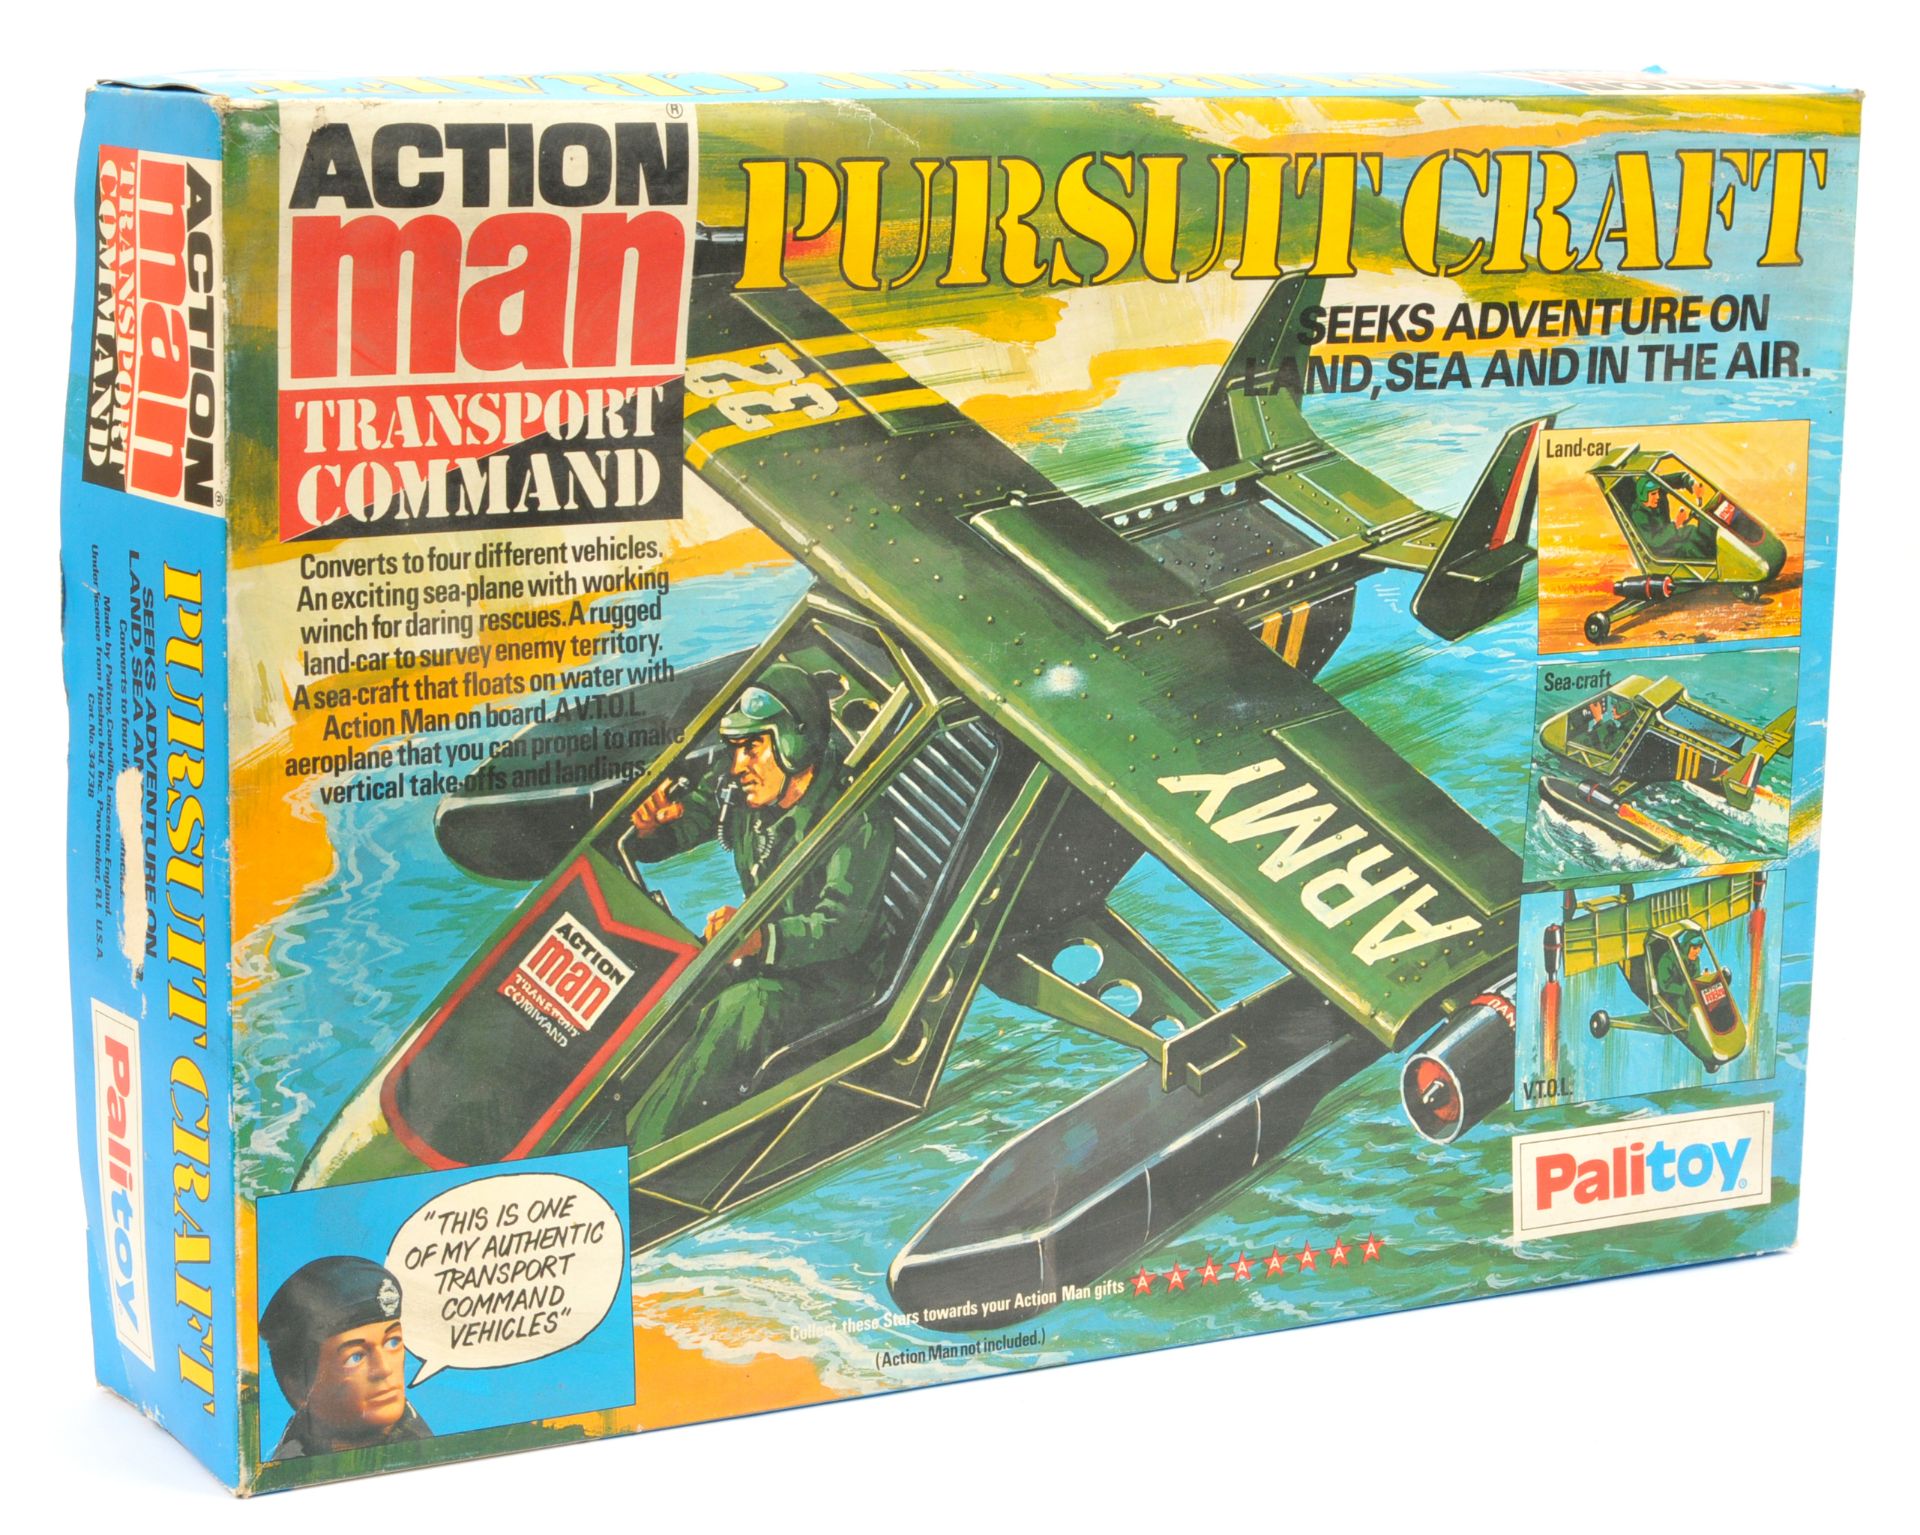 Palitoy Action Man Vintage Pursuit Craft #34738 in original box, various contents and instruction...